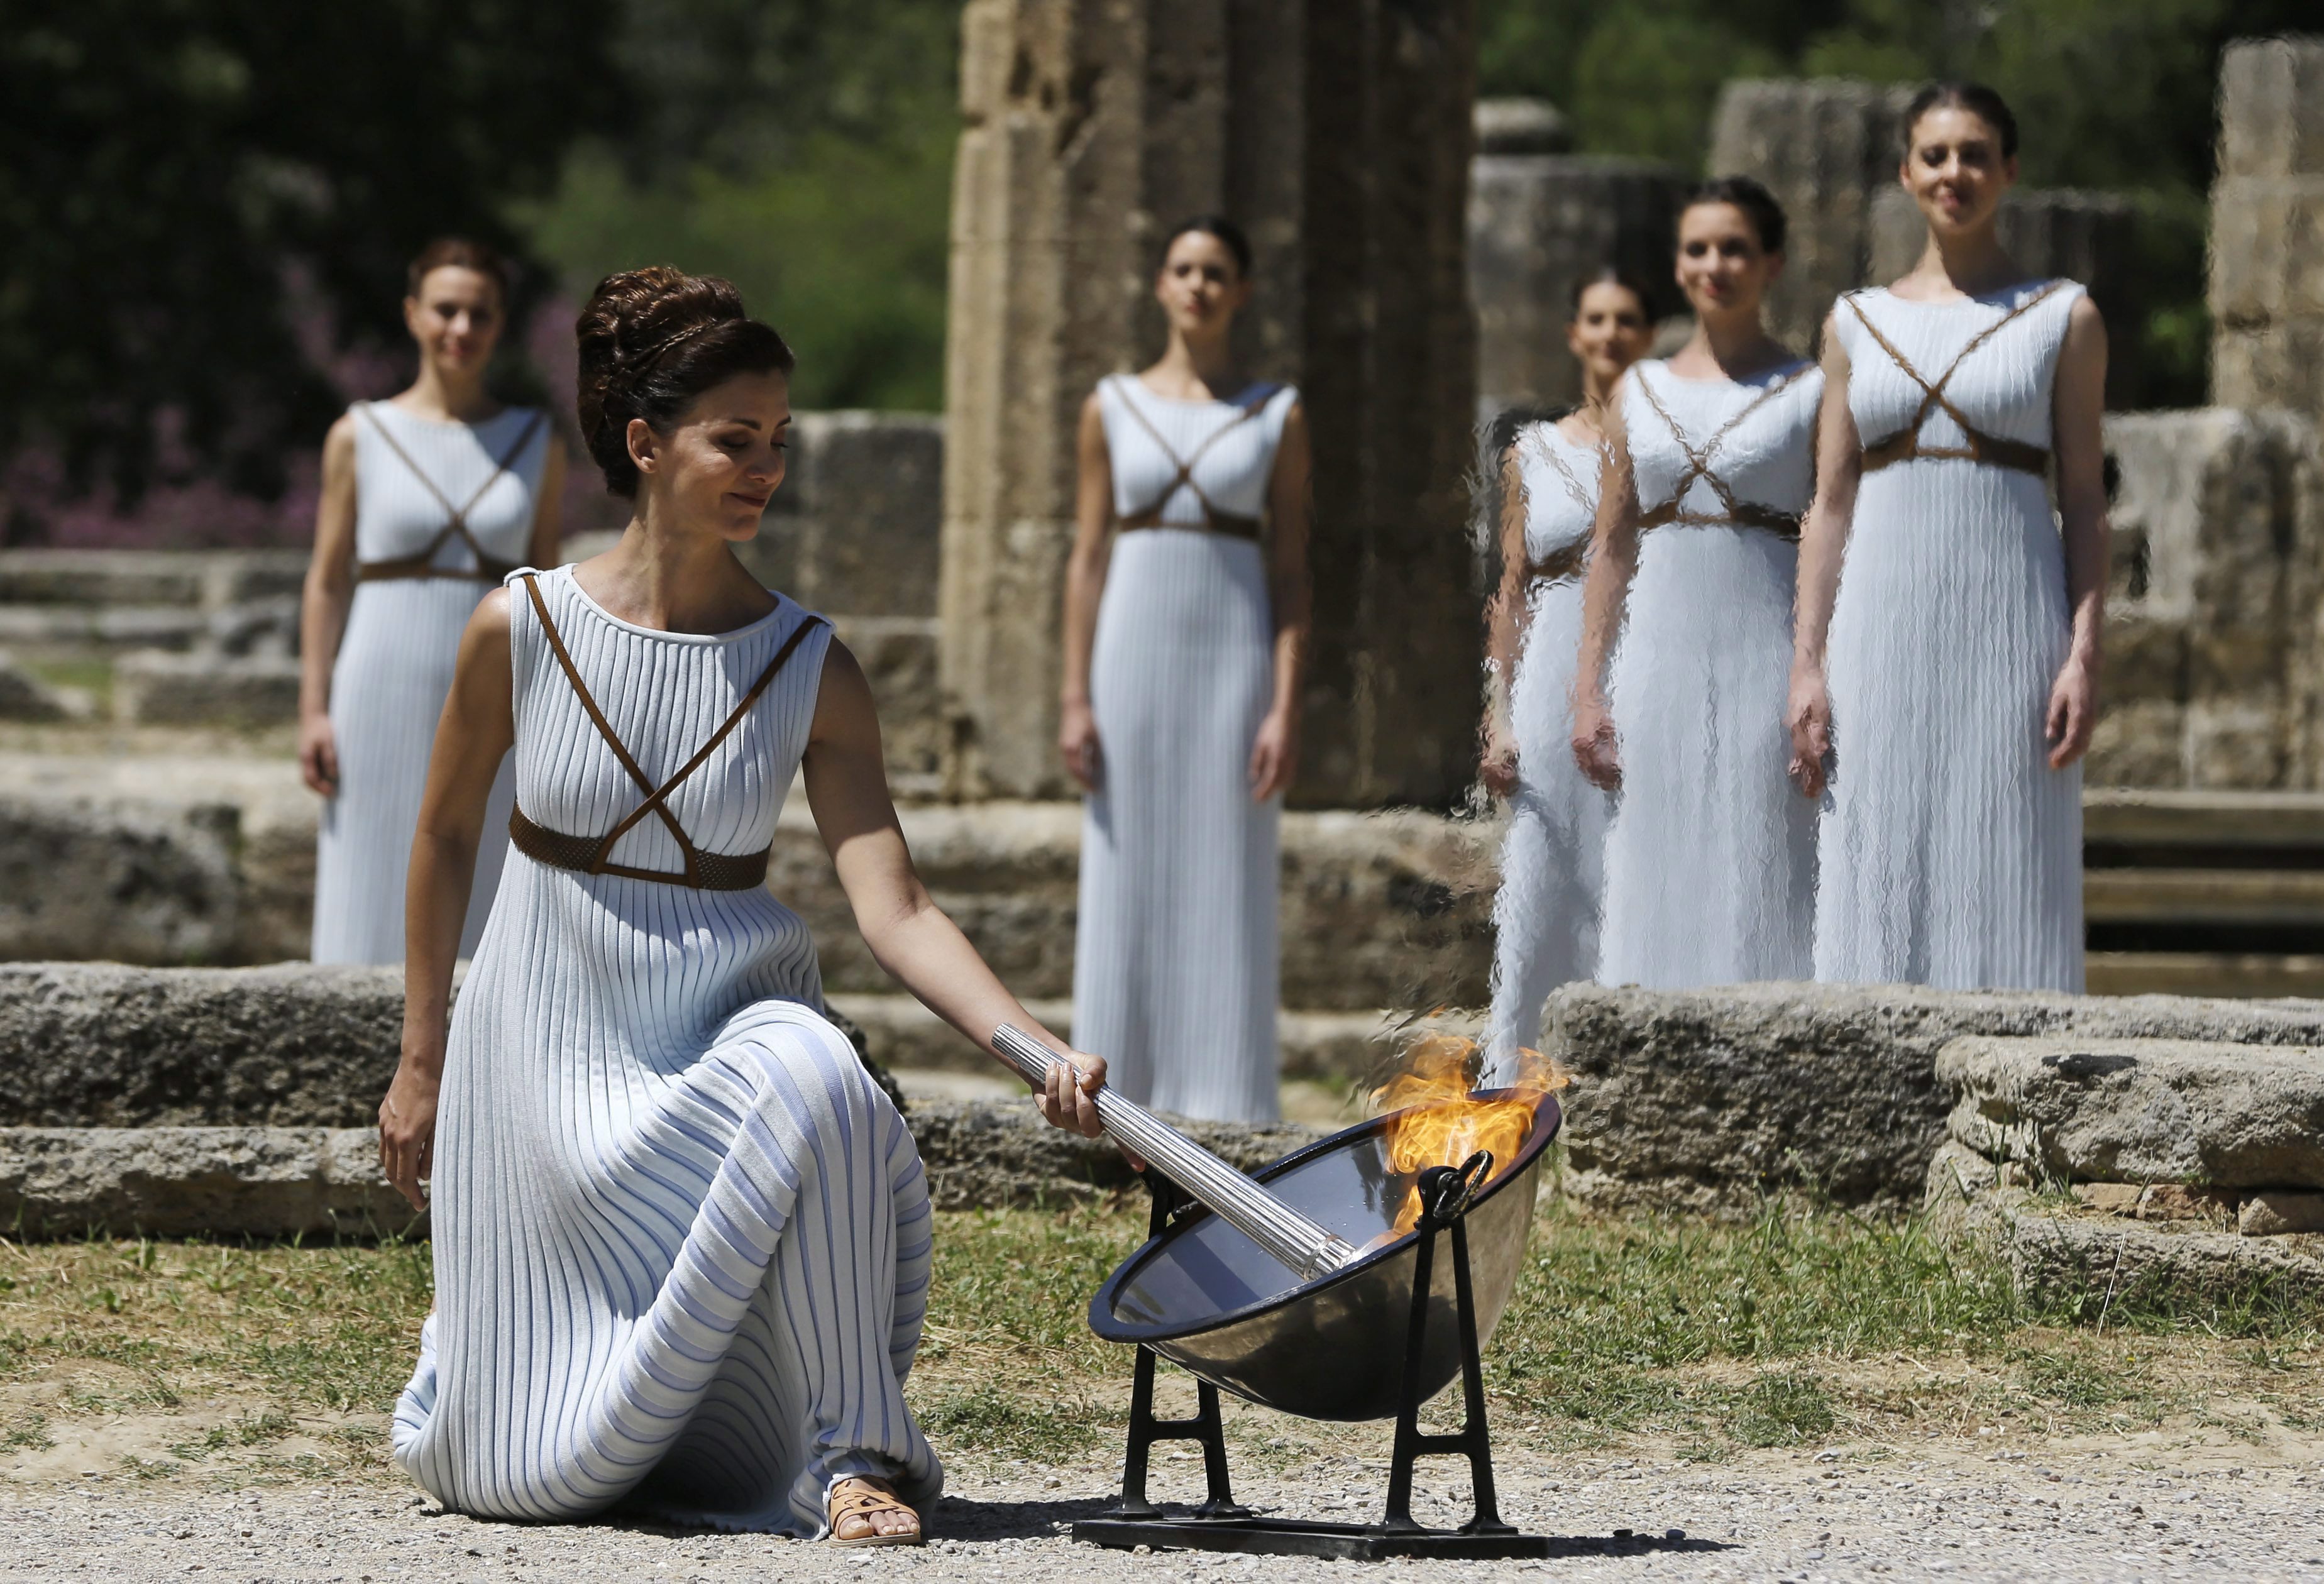 A dancer dressed as priestesses lights the Rio Olympic torch with a parabolic mirror